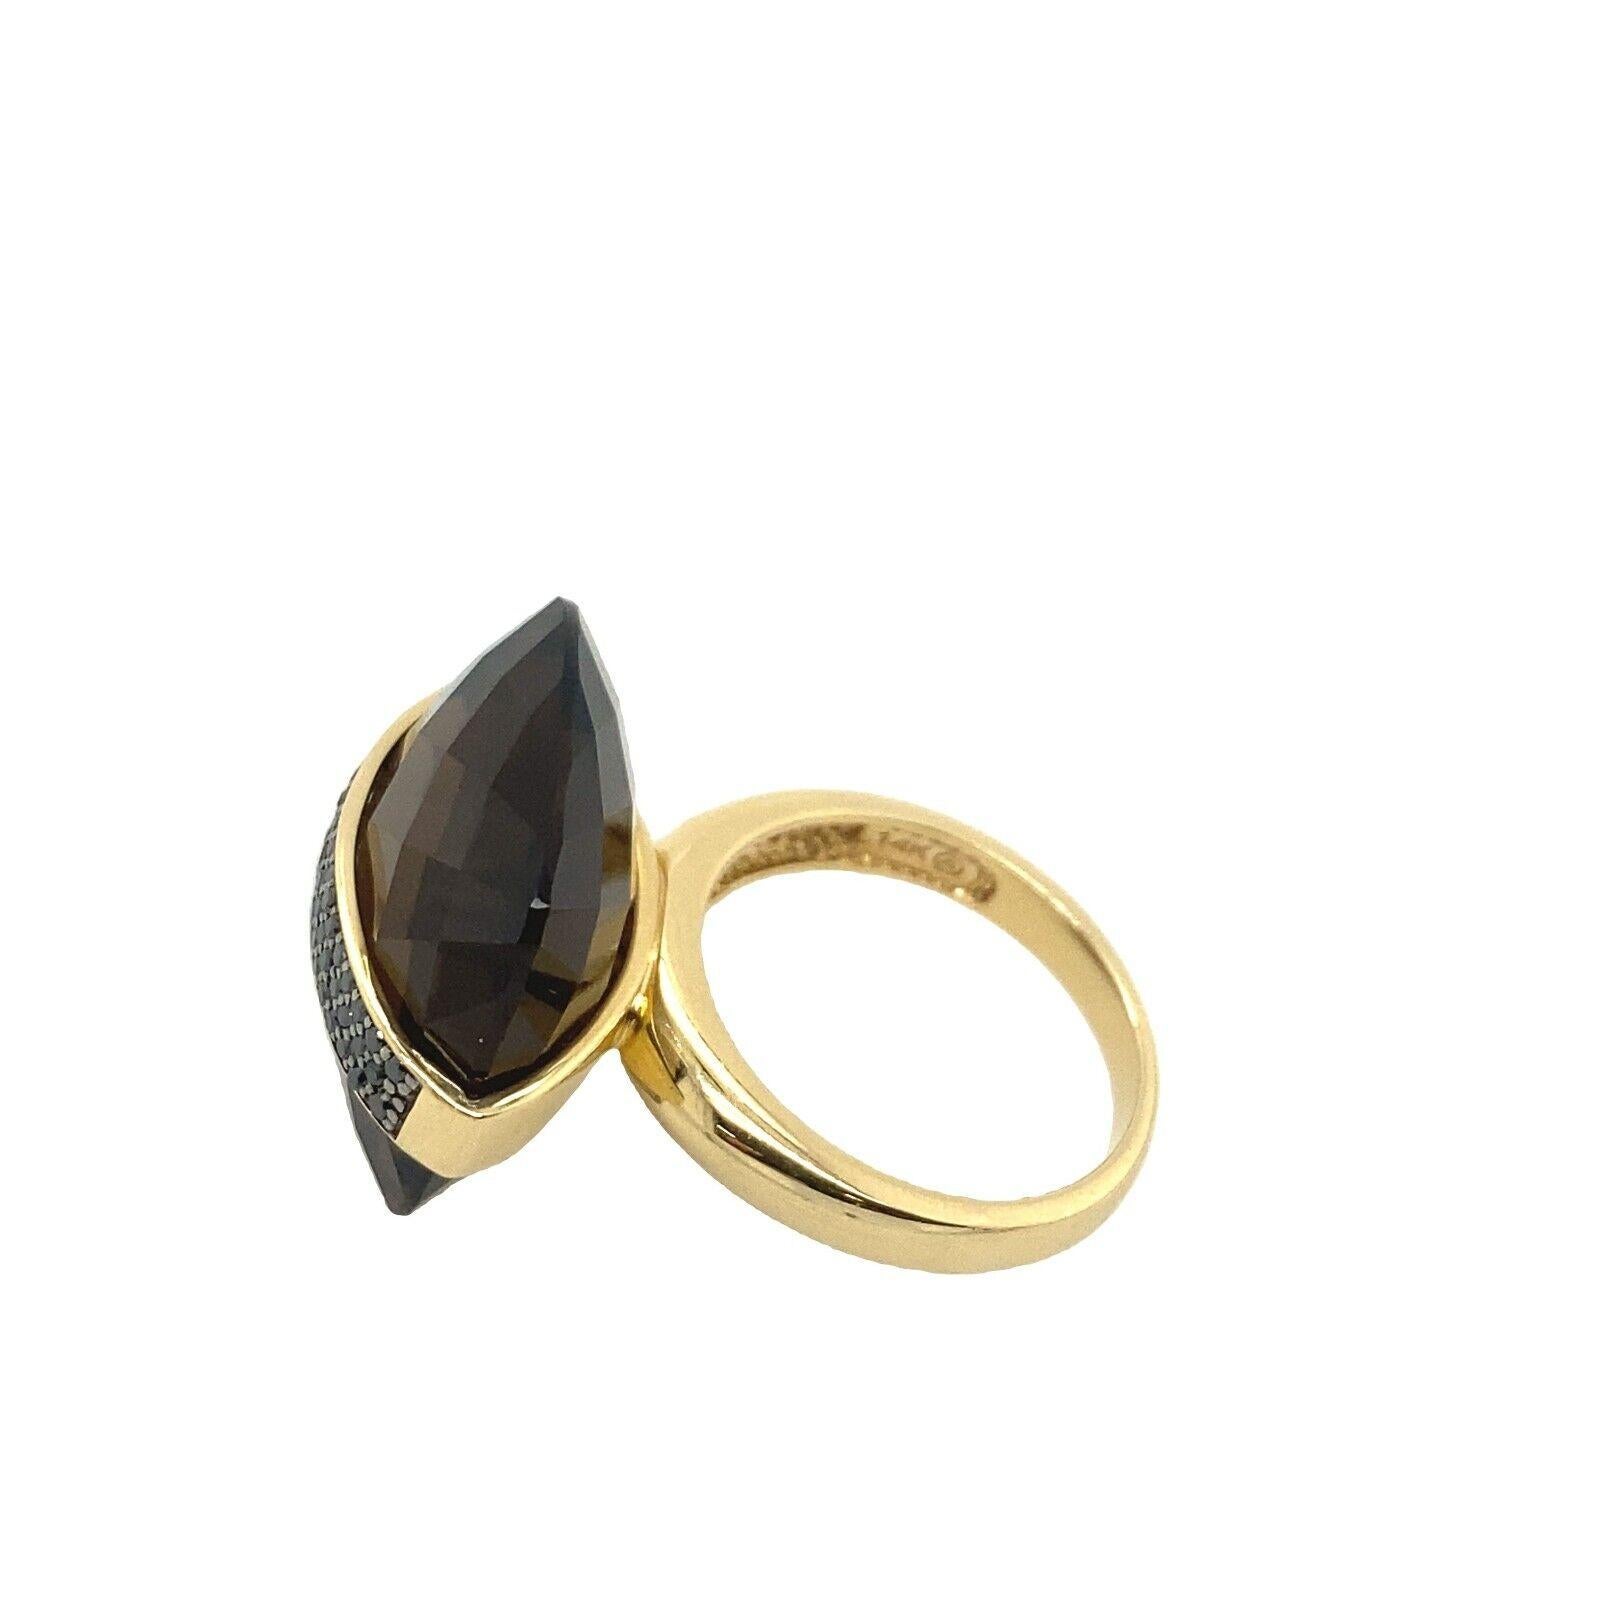 Cushion Cut Cushion Shape Facetted Smoked Quartz Ring Set in 14ct Yellow Gold&Black Diamonds For Sale